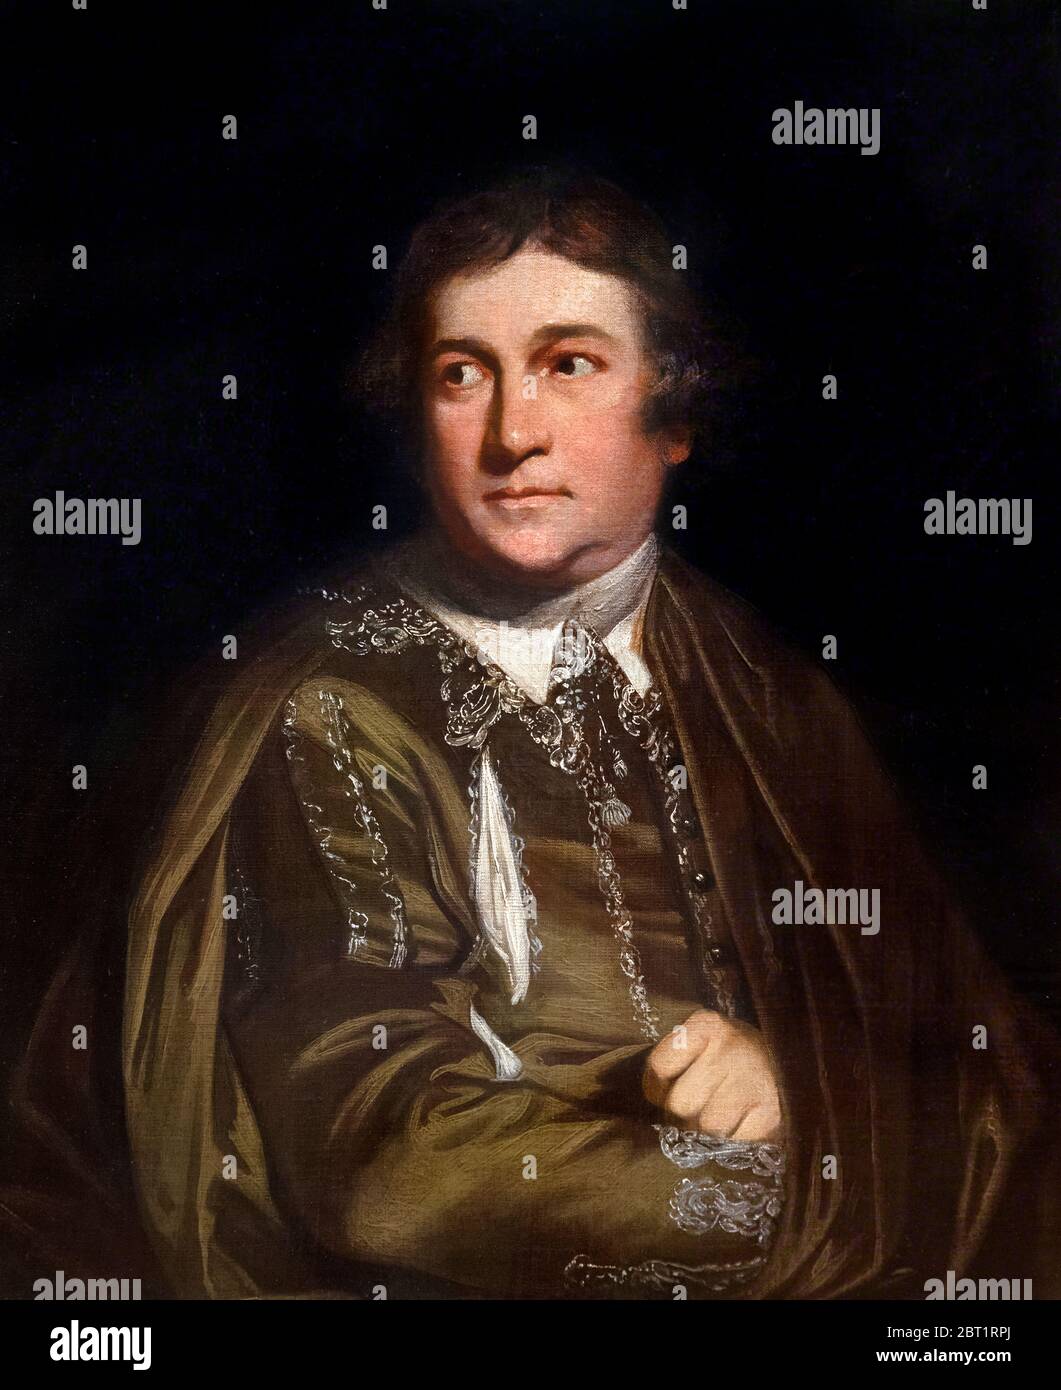 David Garrick as Kitely in 'Every Man in his Humour', portrait after Sir Joshua Reynolds, oil on canvas, 1768. Stock Photo